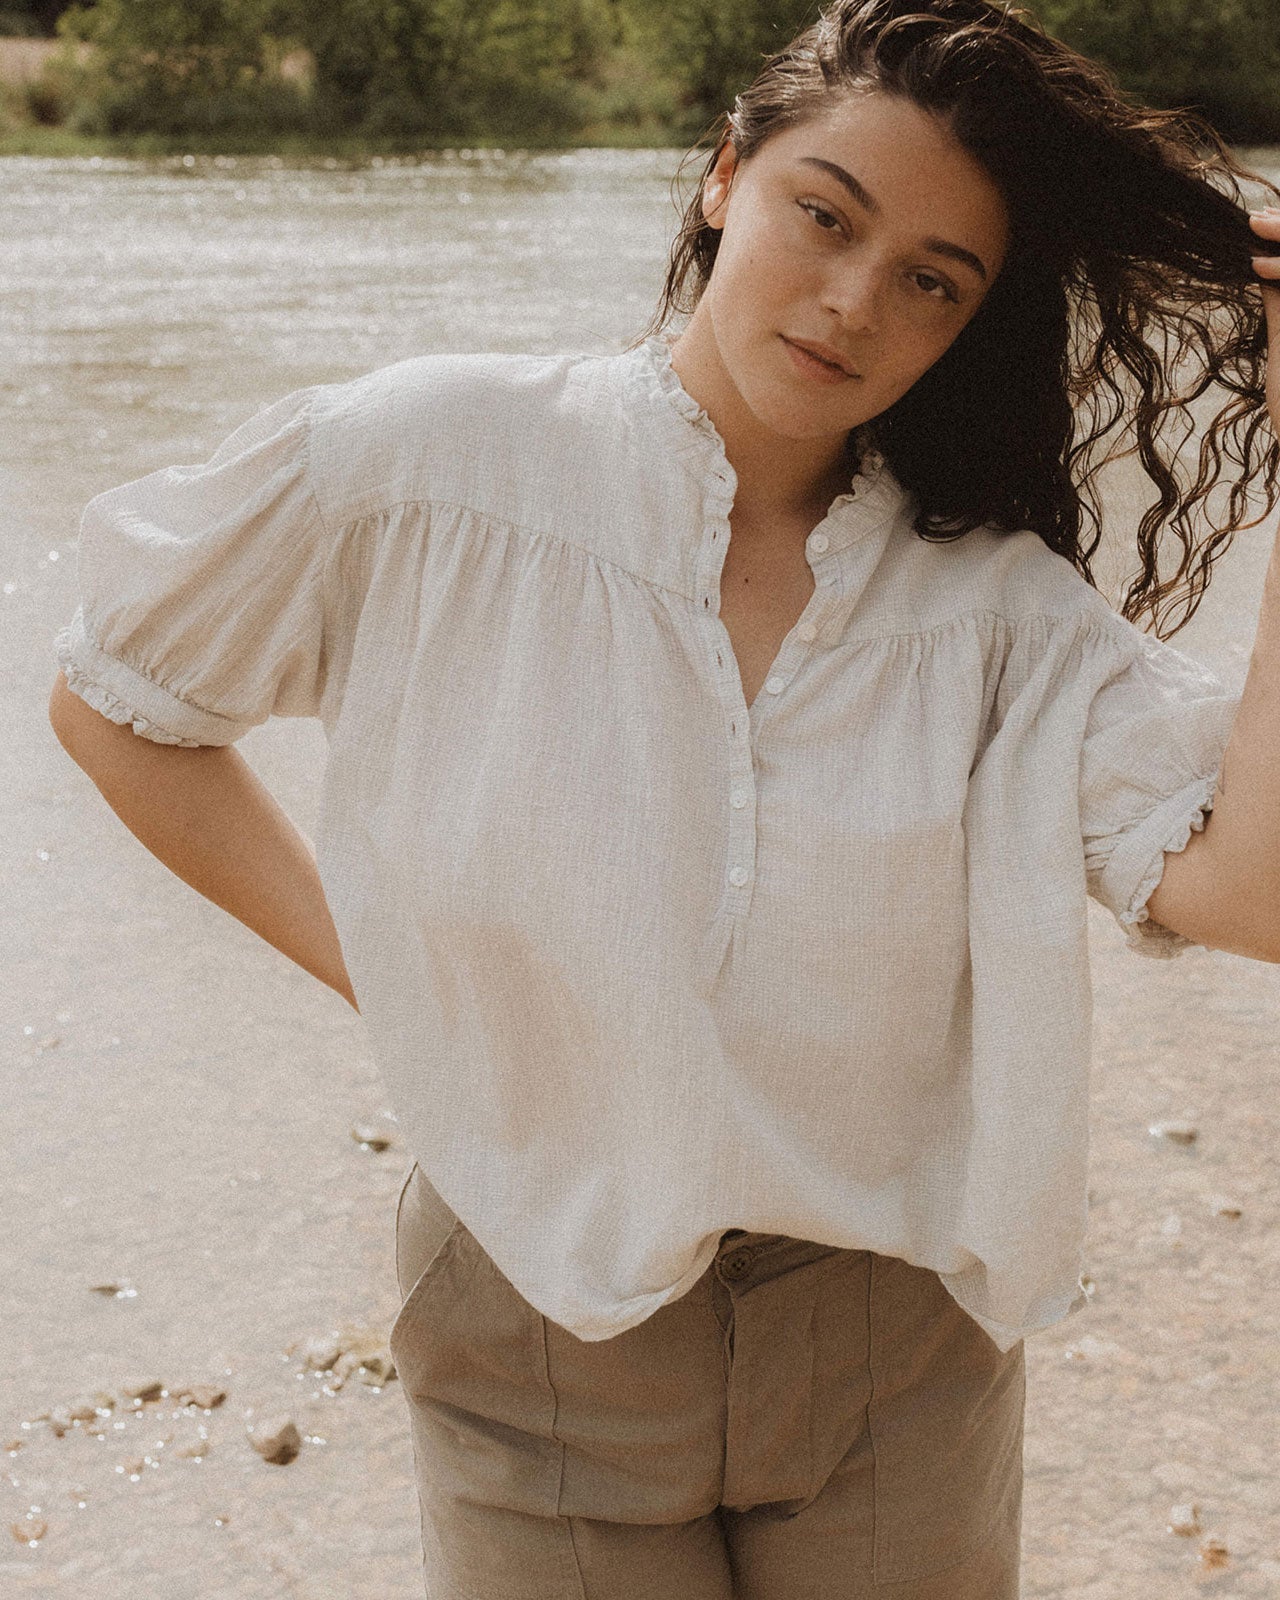 Esby Apparel Dana Top. A vintage-inspired intricate and oversized blouse. Made with a linen and cotton blend.